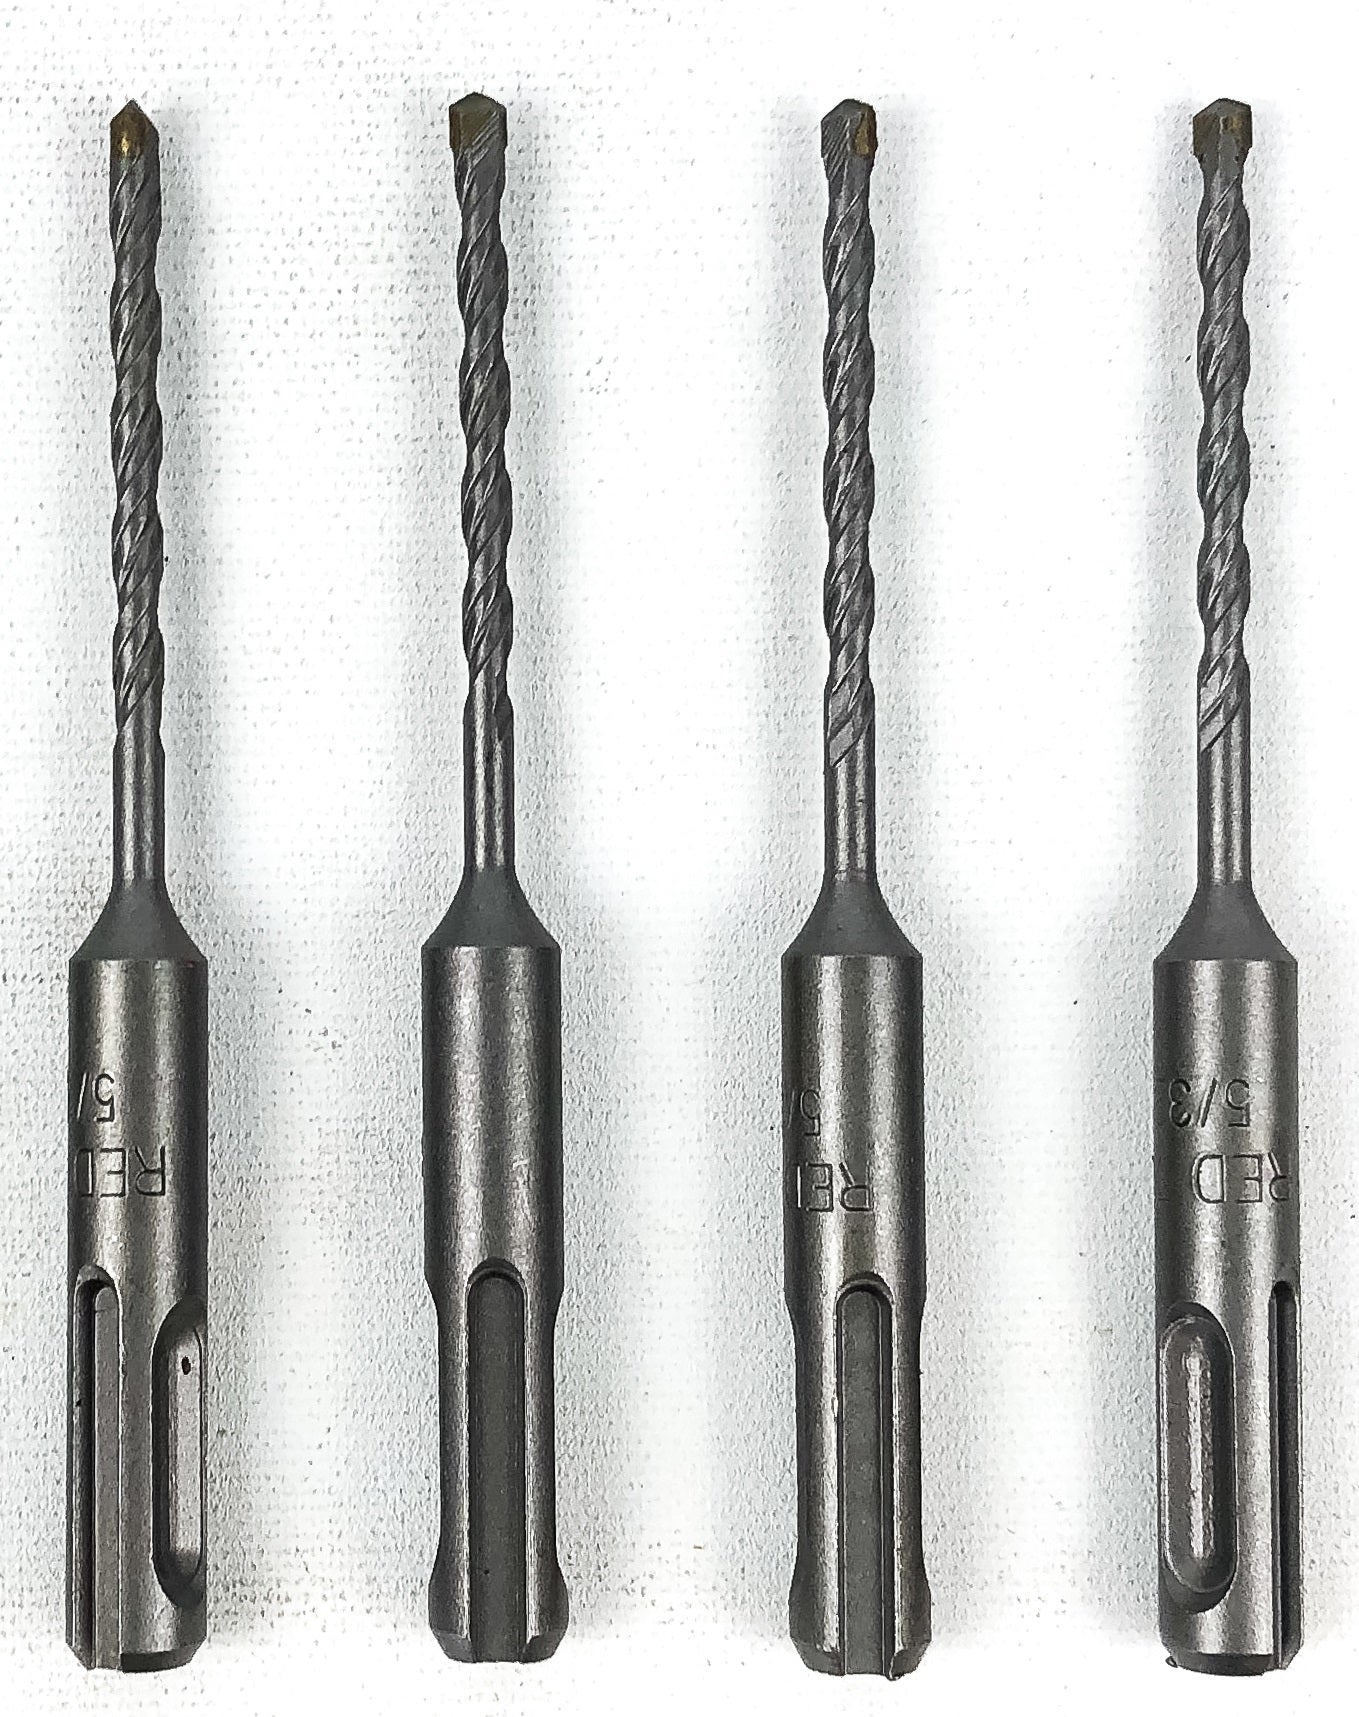 How To Choose The Right Hammer Drill Bit: Max SDS Plus vs. Regular